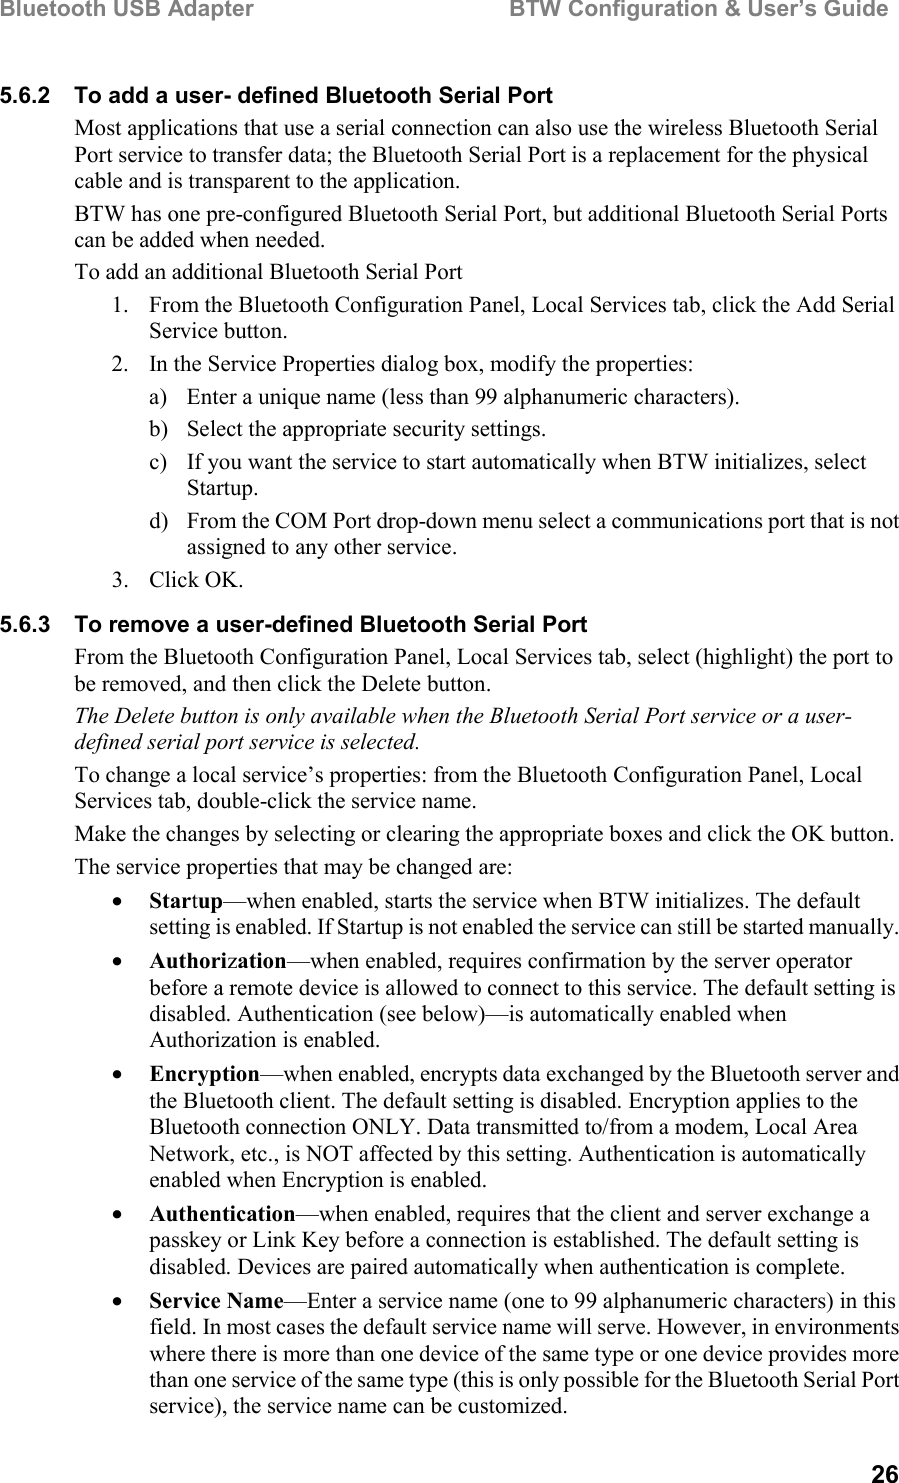 Bluetooth USB Adapter                                        BTW Configuration &amp; User’s Guide265.6.2  To add a user- defined Bluetooth Serial PortMost applications that use a serial connection can also use the wireless Bluetooth SerialPort service to transfer data; the Bluetooth Serial Port is a replacement for the physicalcable and is transparent to the application.BTW has one pre-configured Bluetooth Serial Port, but additional Bluetooth Serial Portscan be added when needed.To add an additional Bluetooth Serial Port1. From the Bluetooth Configuration Panel, Local Services tab, click the Add SerialService button.2. In the Service Properties dialog box, modify the properties:a) Enter a unique name (less than 99 alphanumeric characters).b) Select the appropriate security settings.c) If you want the service to start automatically when BTW initializes, selectStartup.d) From the COM Port drop-down menu select a communications port that is notassigned to any other service.3. Click OK.5.6.3  To remove a user-defined Bluetooth Serial PortFrom the Bluetooth Configuration Panel, Local Services tab, select (highlight) the port tobe removed, and then click the Delete button.The Delete button is only available when the Bluetooth Serial Port service or a user-defined serial port service is selected.To change a local service’s properties: from the Bluetooth Configuration Panel, LocalServices tab, double-click the service name.Make the changes by selecting or clearing the appropriate boxes and click the OK button.The service properties that may be changed are:• Startup—when enabled, starts the service when BTW initializes. The defaultsetting is enabled. If Startup is not enabled the service can still be started manually.• Authorization—when enabled, requires confirmation by the server operatorbefore a remote device is allowed to connect to this service. The default setting isdisabled. Authentication (see below)—is automatically enabled whenAuthorization is enabled.• Encryption—when enabled, encrypts data exchanged by the Bluetooth server andthe Bluetooth client. The default setting is disabled. Encryption applies to theBluetooth connection ONLY. Data transmitted to/from a modem, Local AreaNetwork, etc., is NOT affected by this setting. Authentication is automaticallyenabled when Encryption is enabled.• Authentication—when enabled, requires that the client and server exchange apasskey or Link Key before a connection is established. The default setting isdisabled. Devices are paired automatically when authentication is complete.• Service Name—Enter a service name (one to 99 alphanumeric characters) in thisfield. In most cases the default service name will serve. However, in environmentswhere there is more than one device of the same type or one device provides morethan one service of the same type (this is only possible for the Bluetooth Serial Portservice), the service name can be customized.